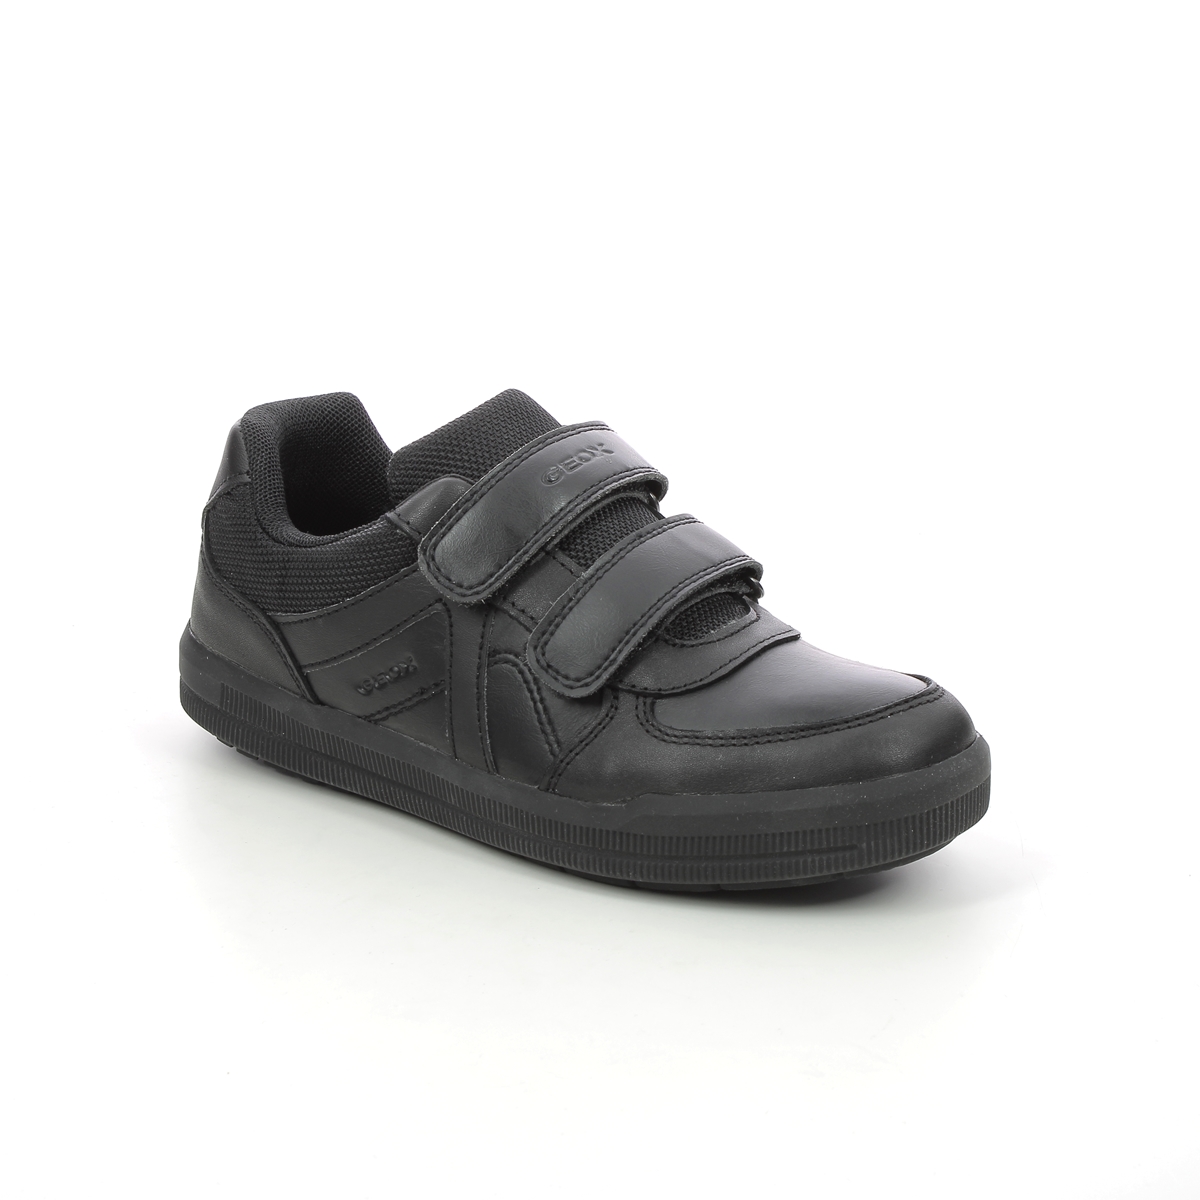 Geox - Arzach Boy Vel (Black Leather) J844Ae-C9999 In Size 36 In Plain Black Leather For School For kids